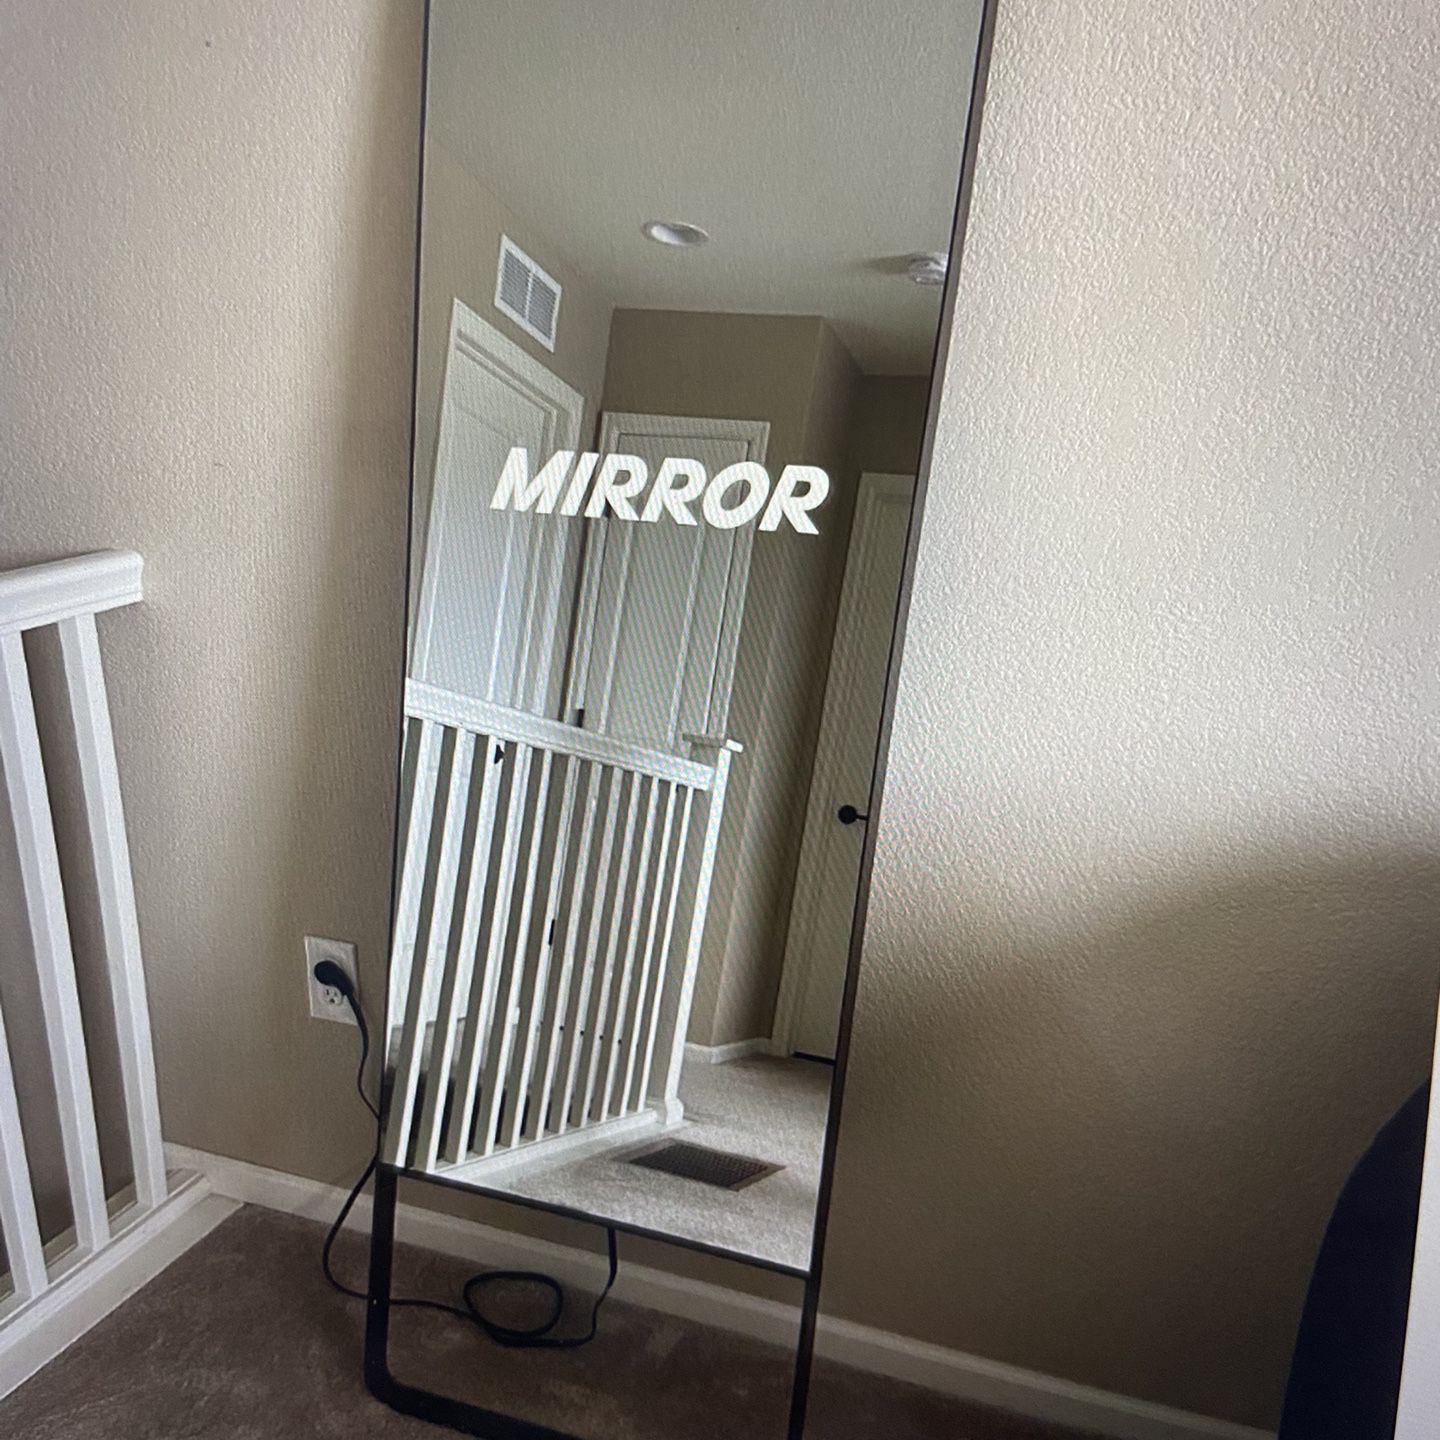 Mirror exercise Workout SMART Home gym